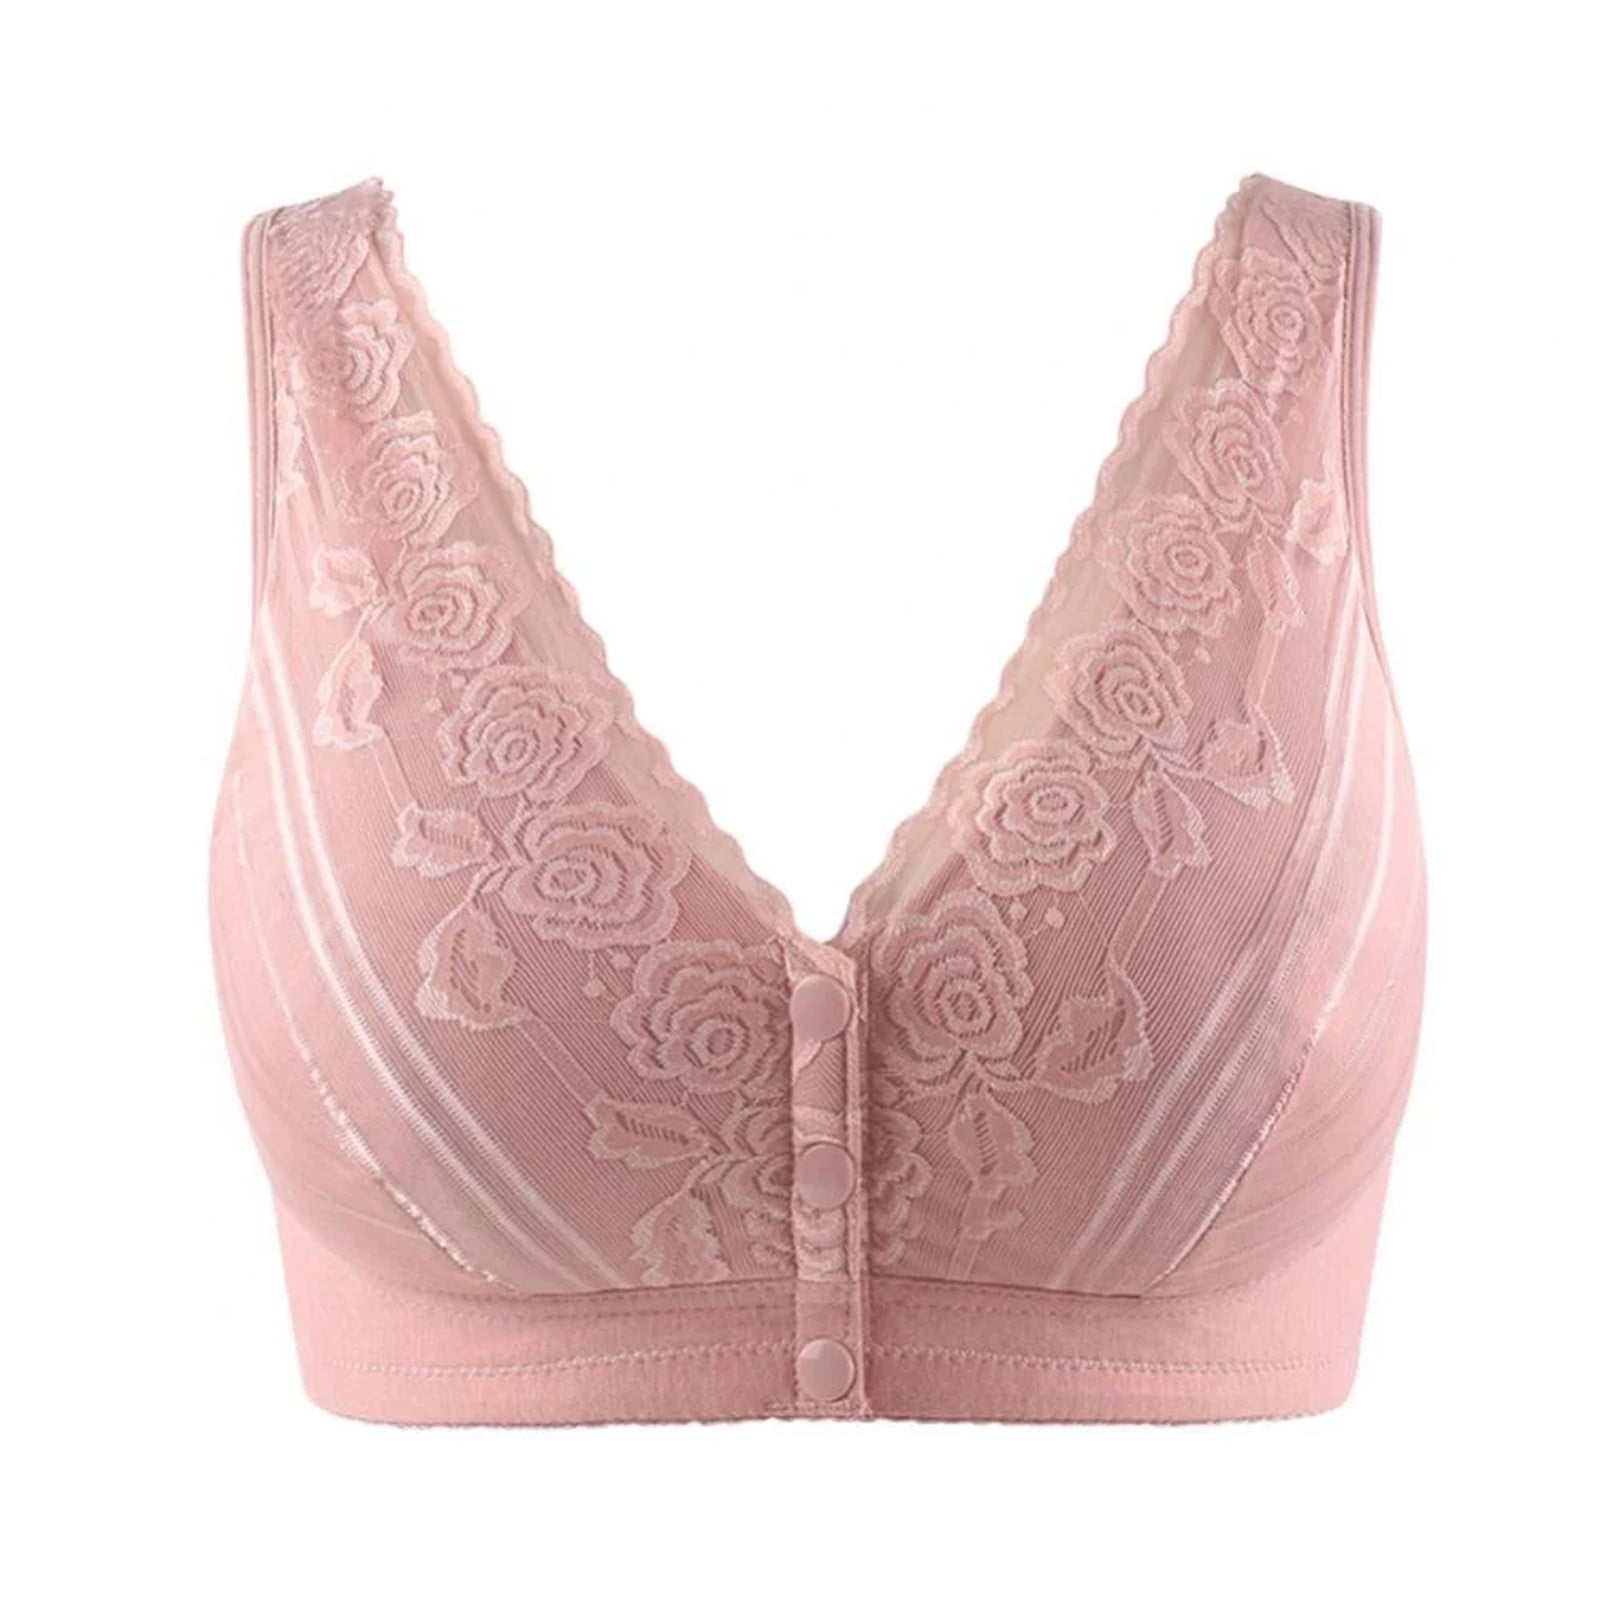 EHTMSAK Front Closure Bras for Women Push Up High Support Floral Minimizer  Bra 34ddd Plus Size Lace Wireless Bra for Women Pink 85 